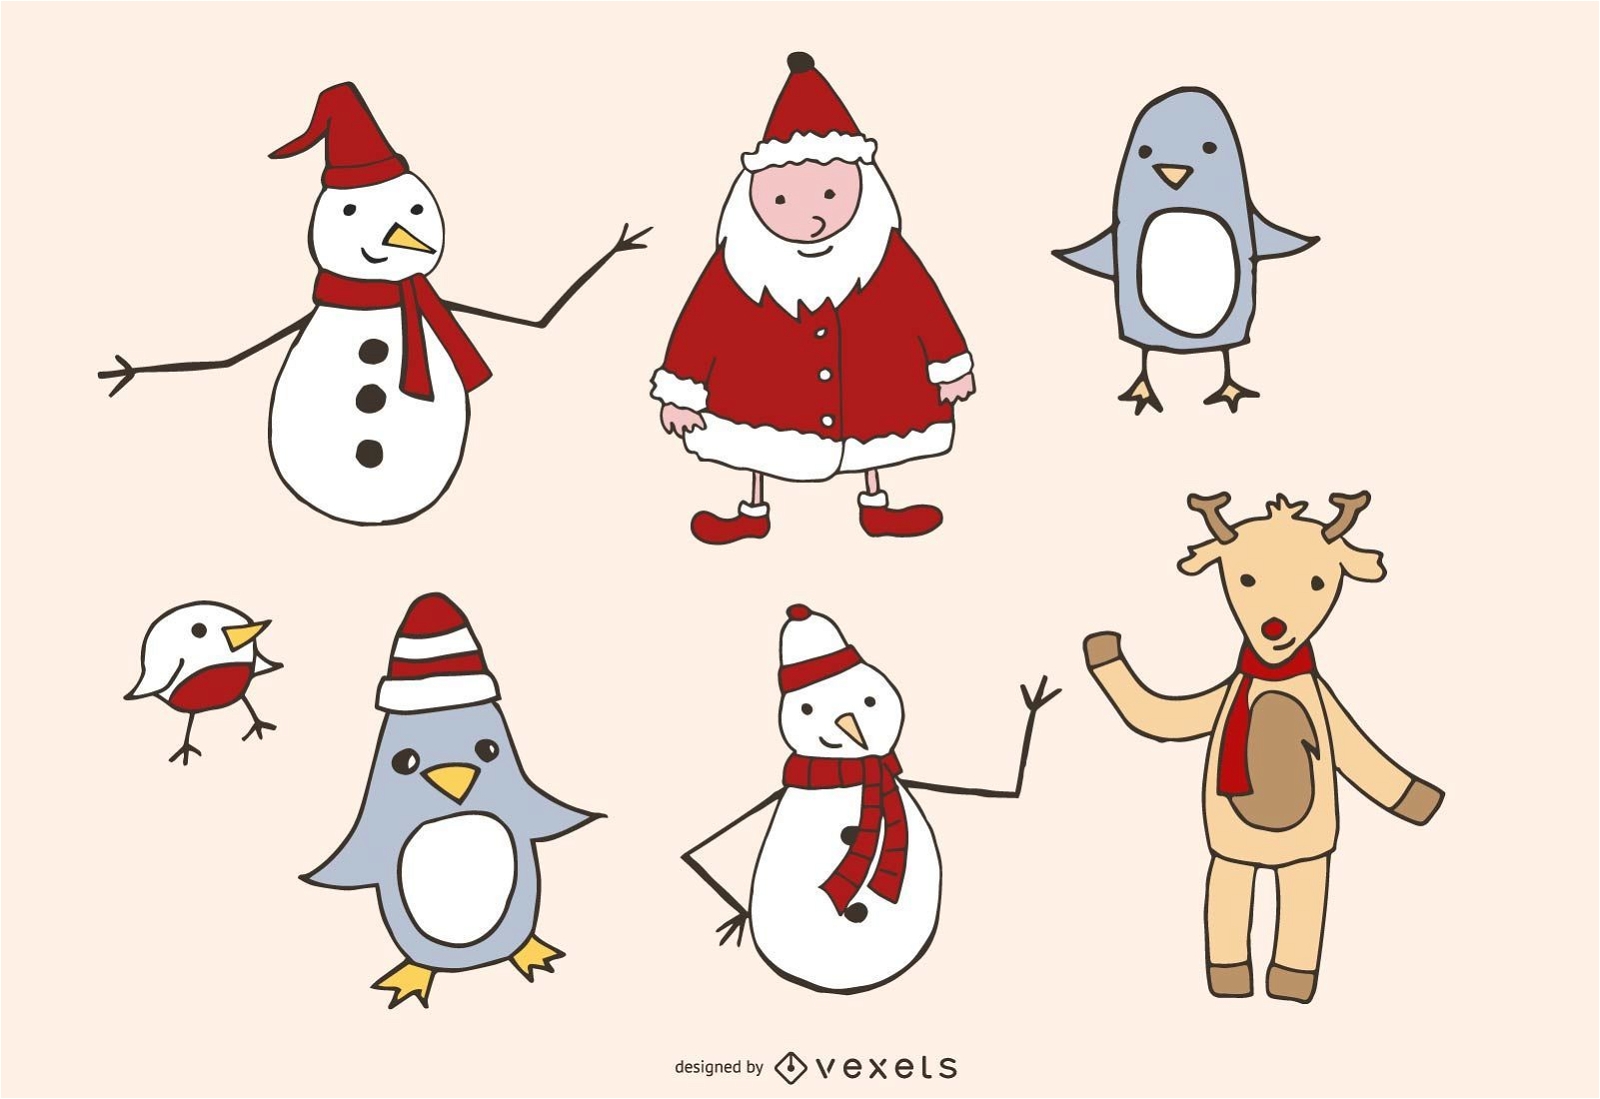 Sketchy Vector Graphics Pack mit Weihnachtsmotiven